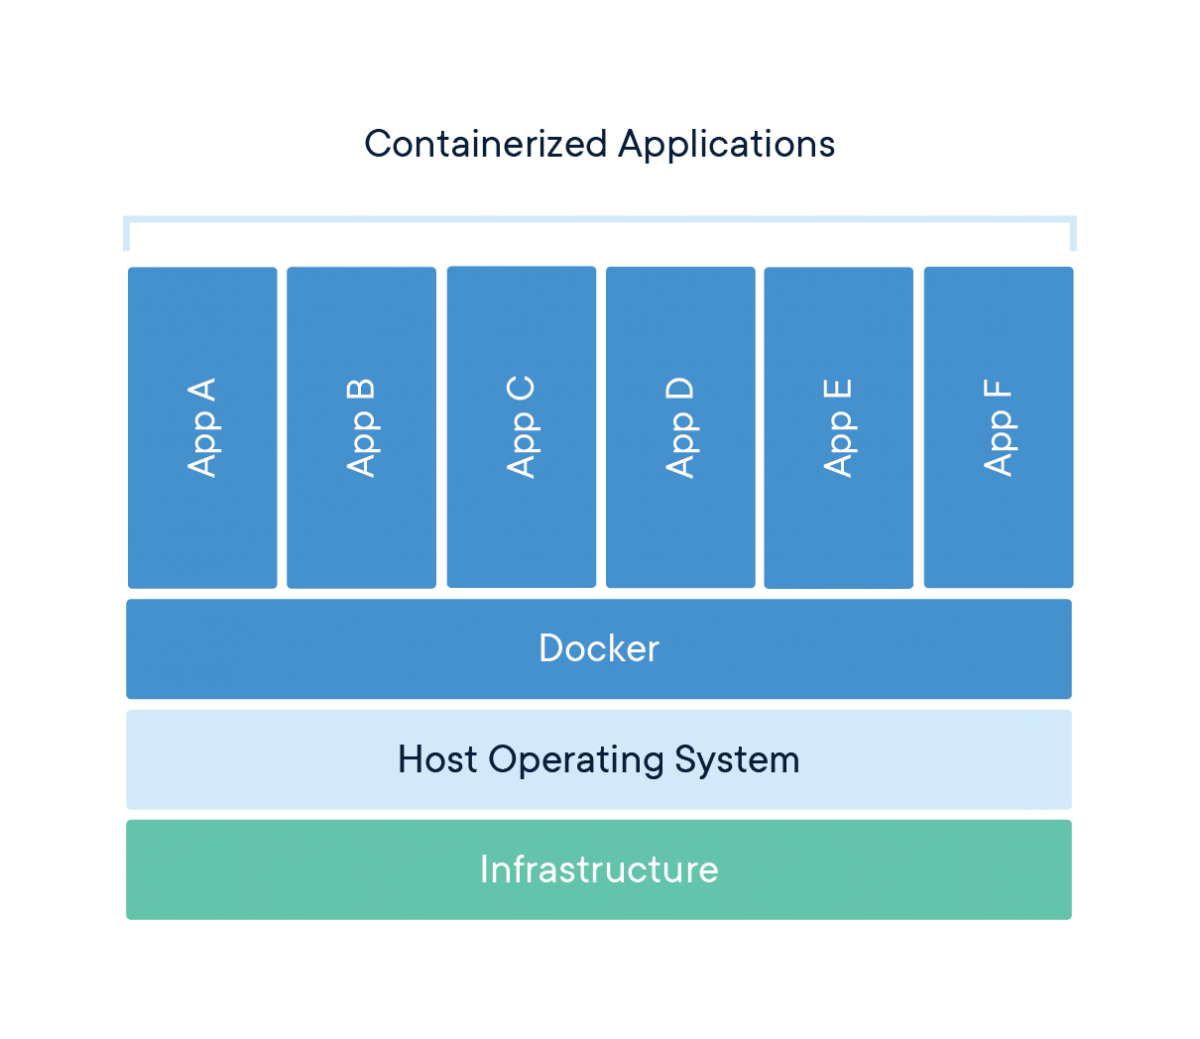 Same architecture with Docker for hosting multiple applications